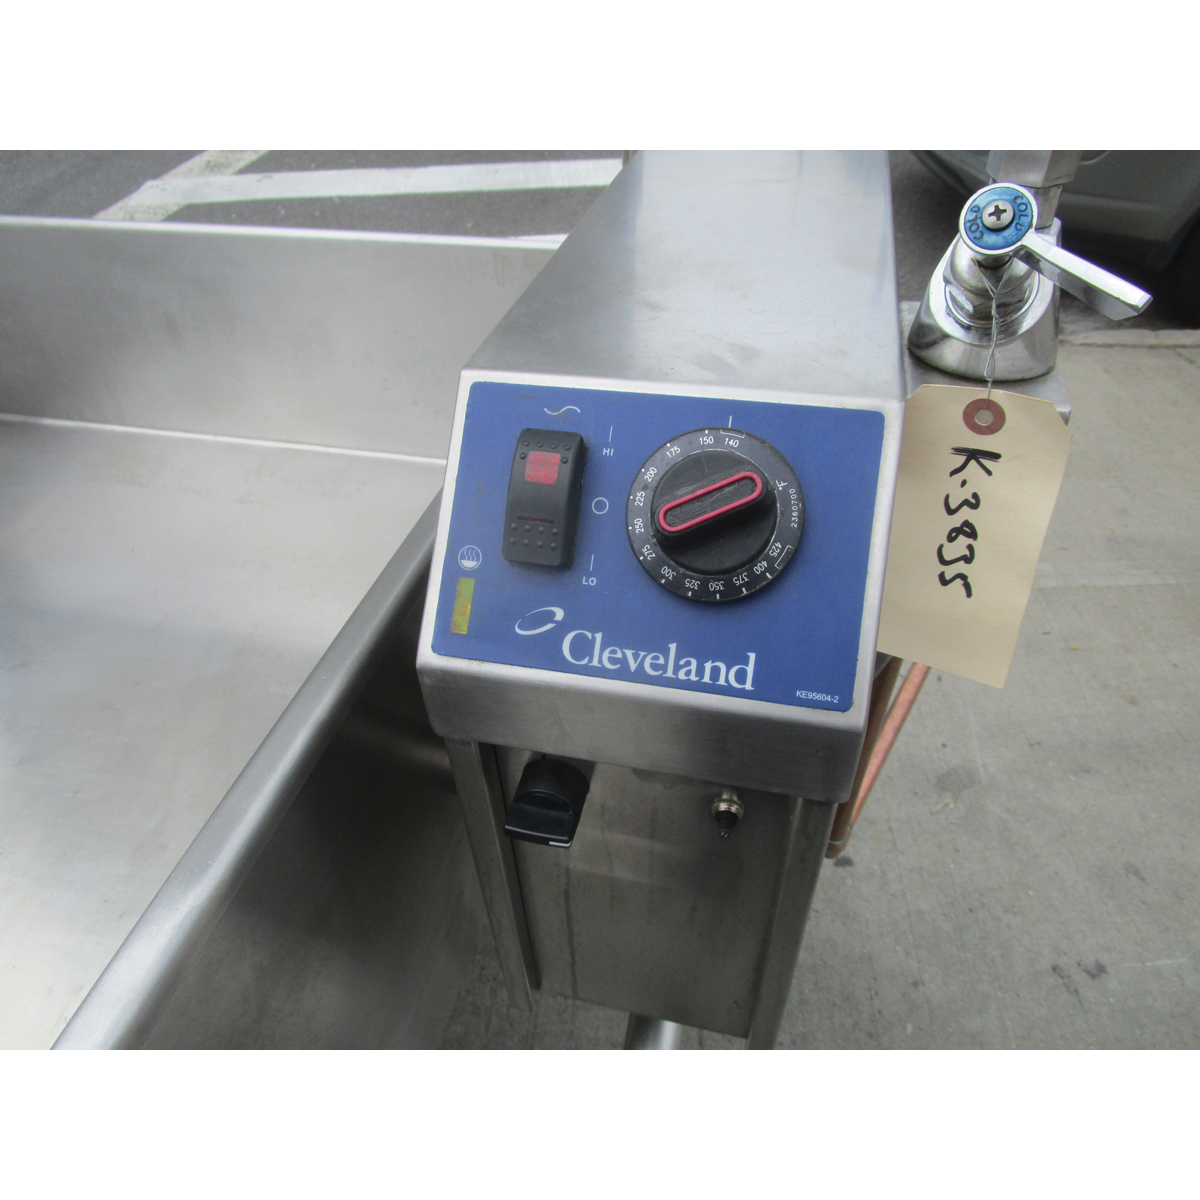 Cleveland 40 Gal. Gas Braising Pan Power Tilt Skillet SGL-40-T1, Used Great Condition image 2